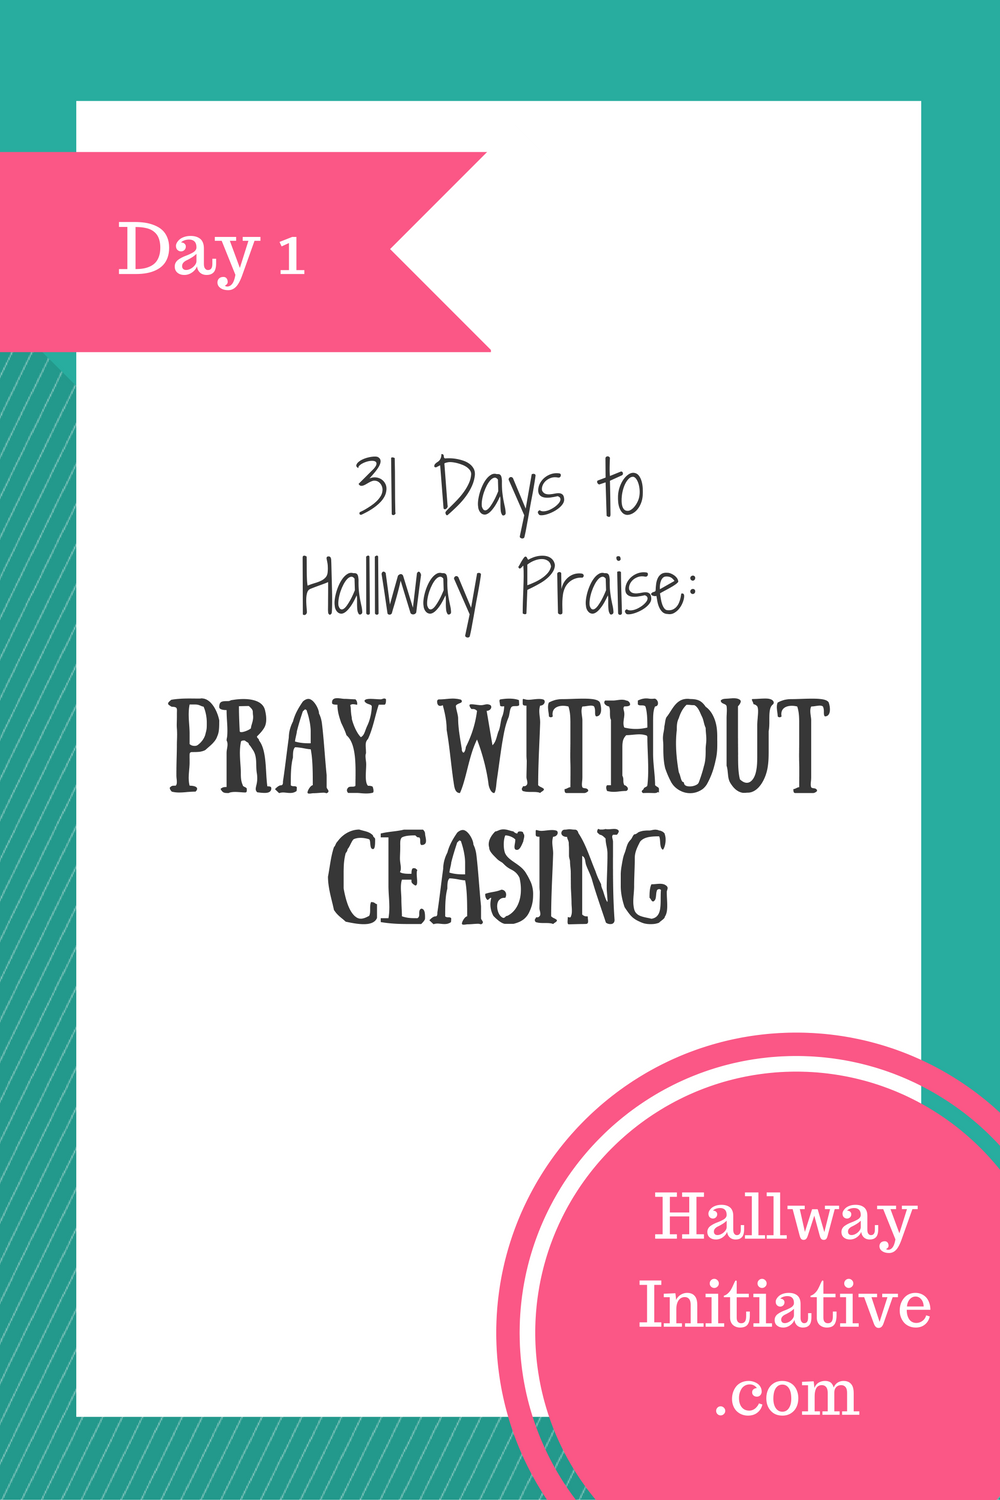 Day 1: pray without ceasing